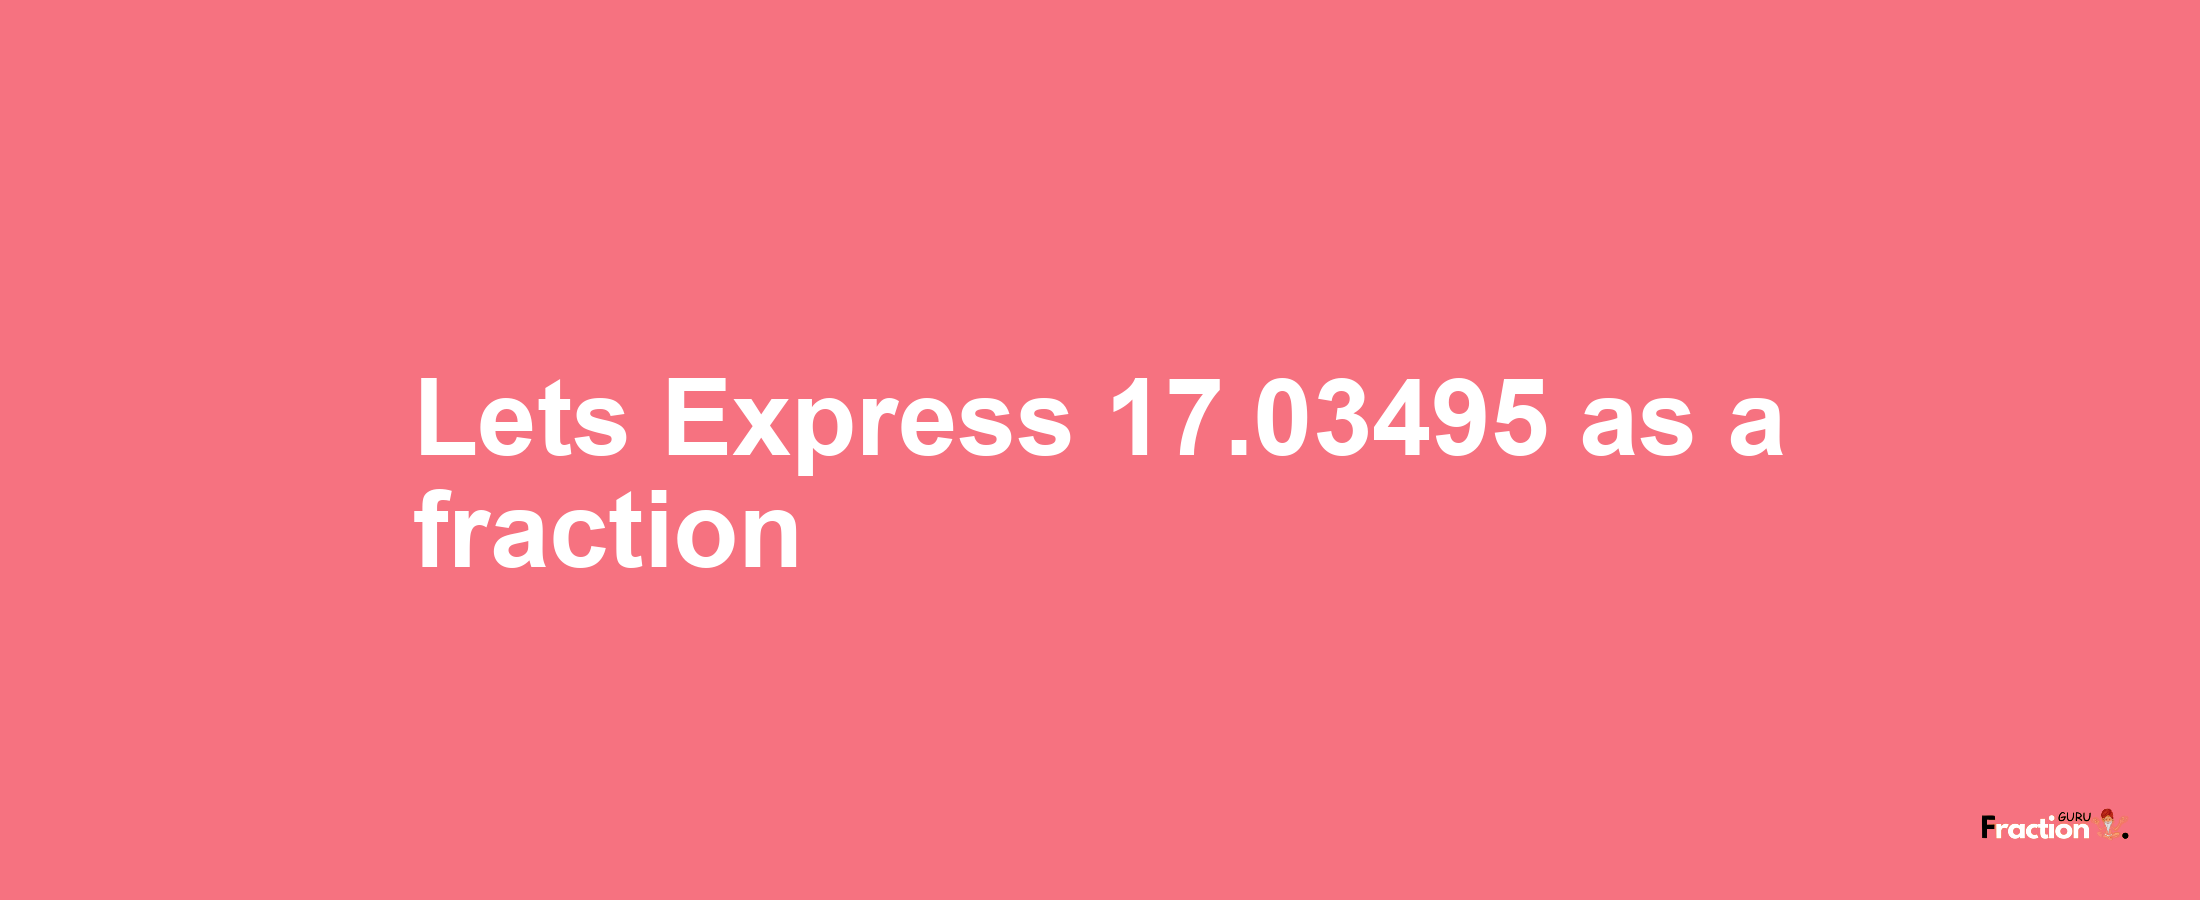 Lets Express 17.03495 as afraction